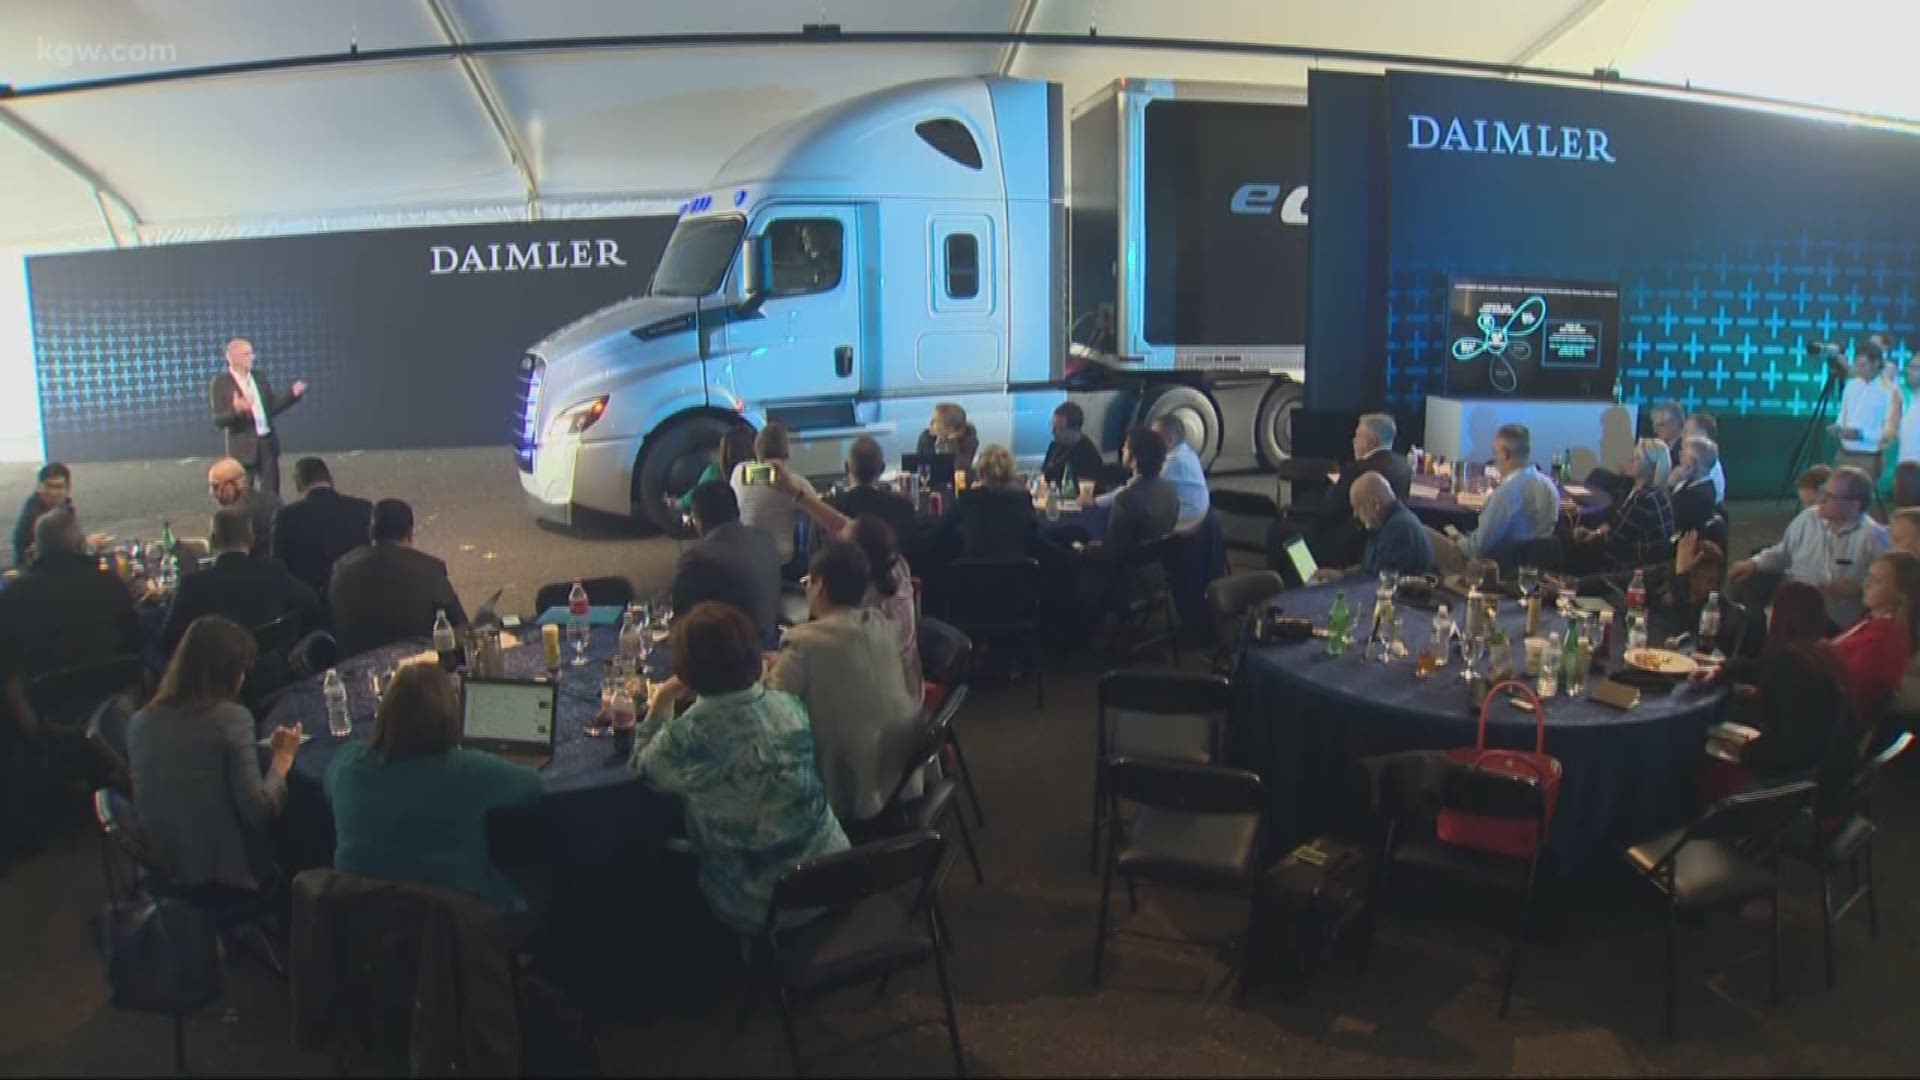 Daimler Trucks aims to lead the way in self-driving commercial vehicle technology with a new facility based in Portland. 